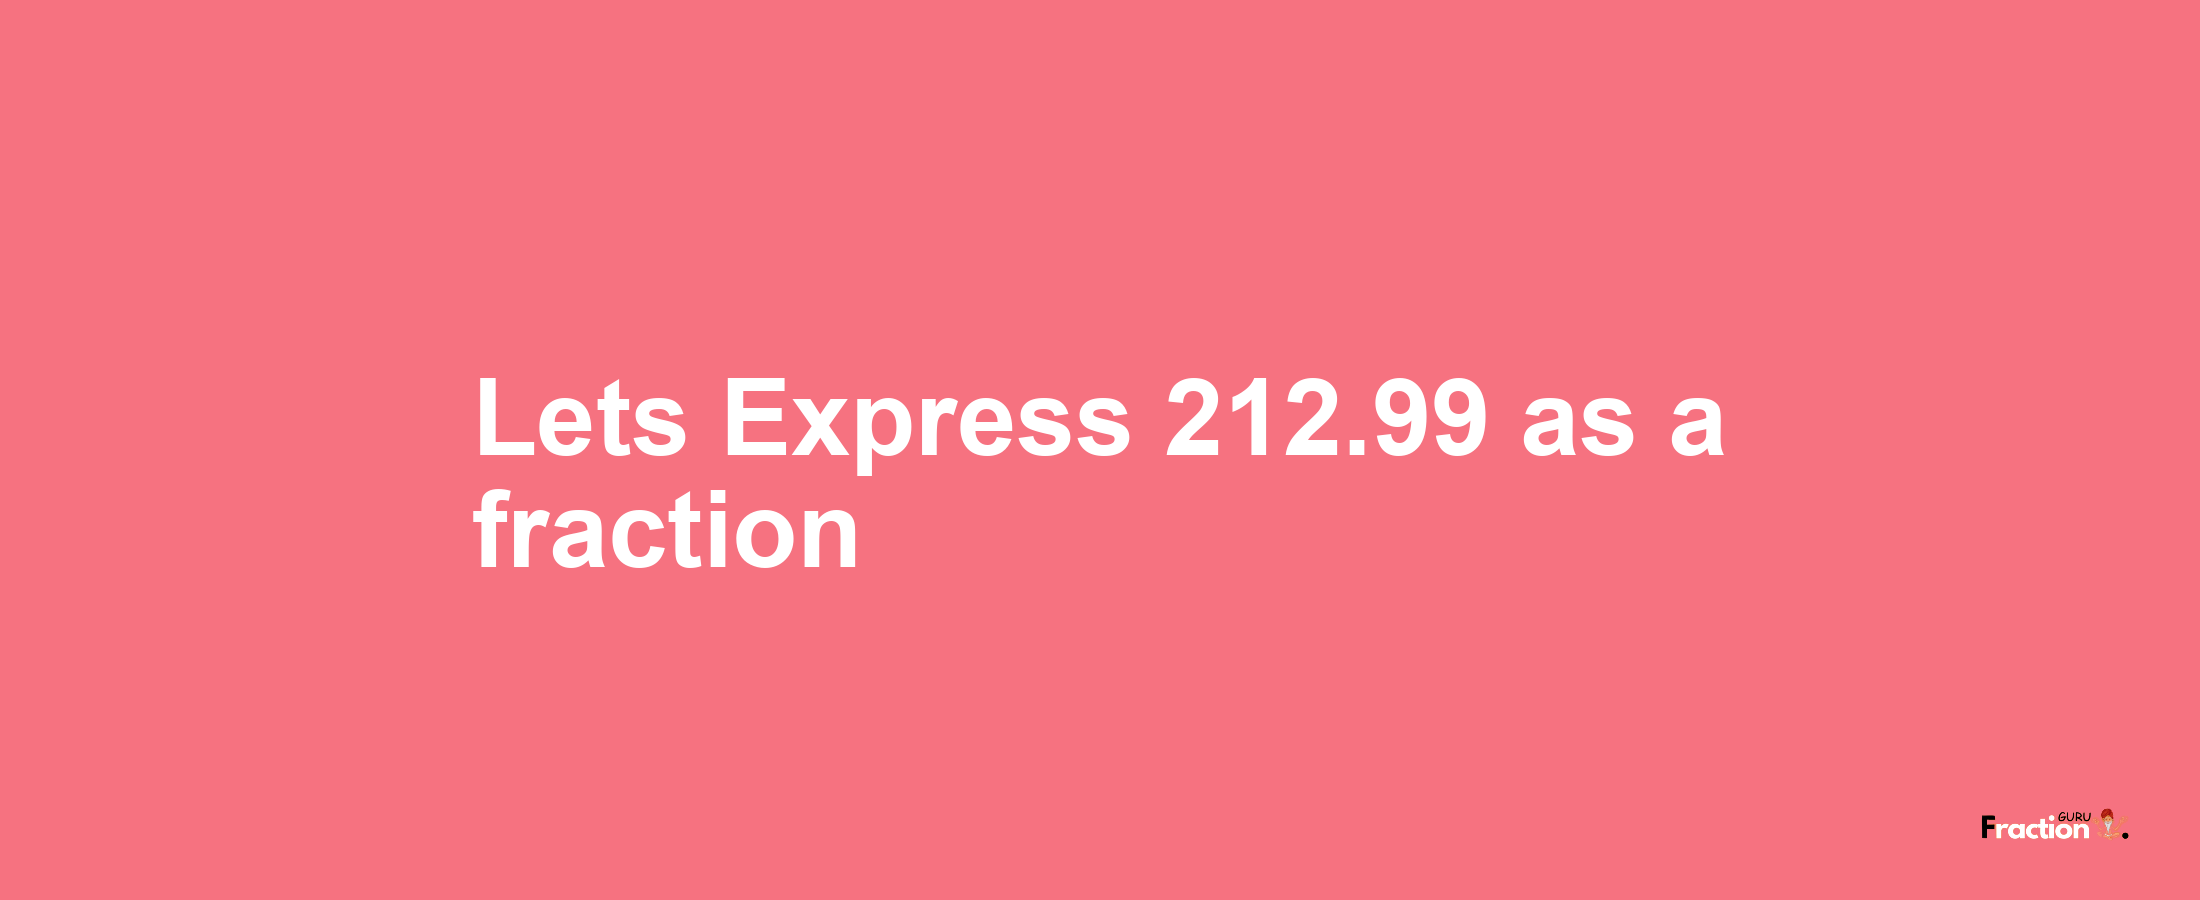 Lets Express 212.99 as afraction